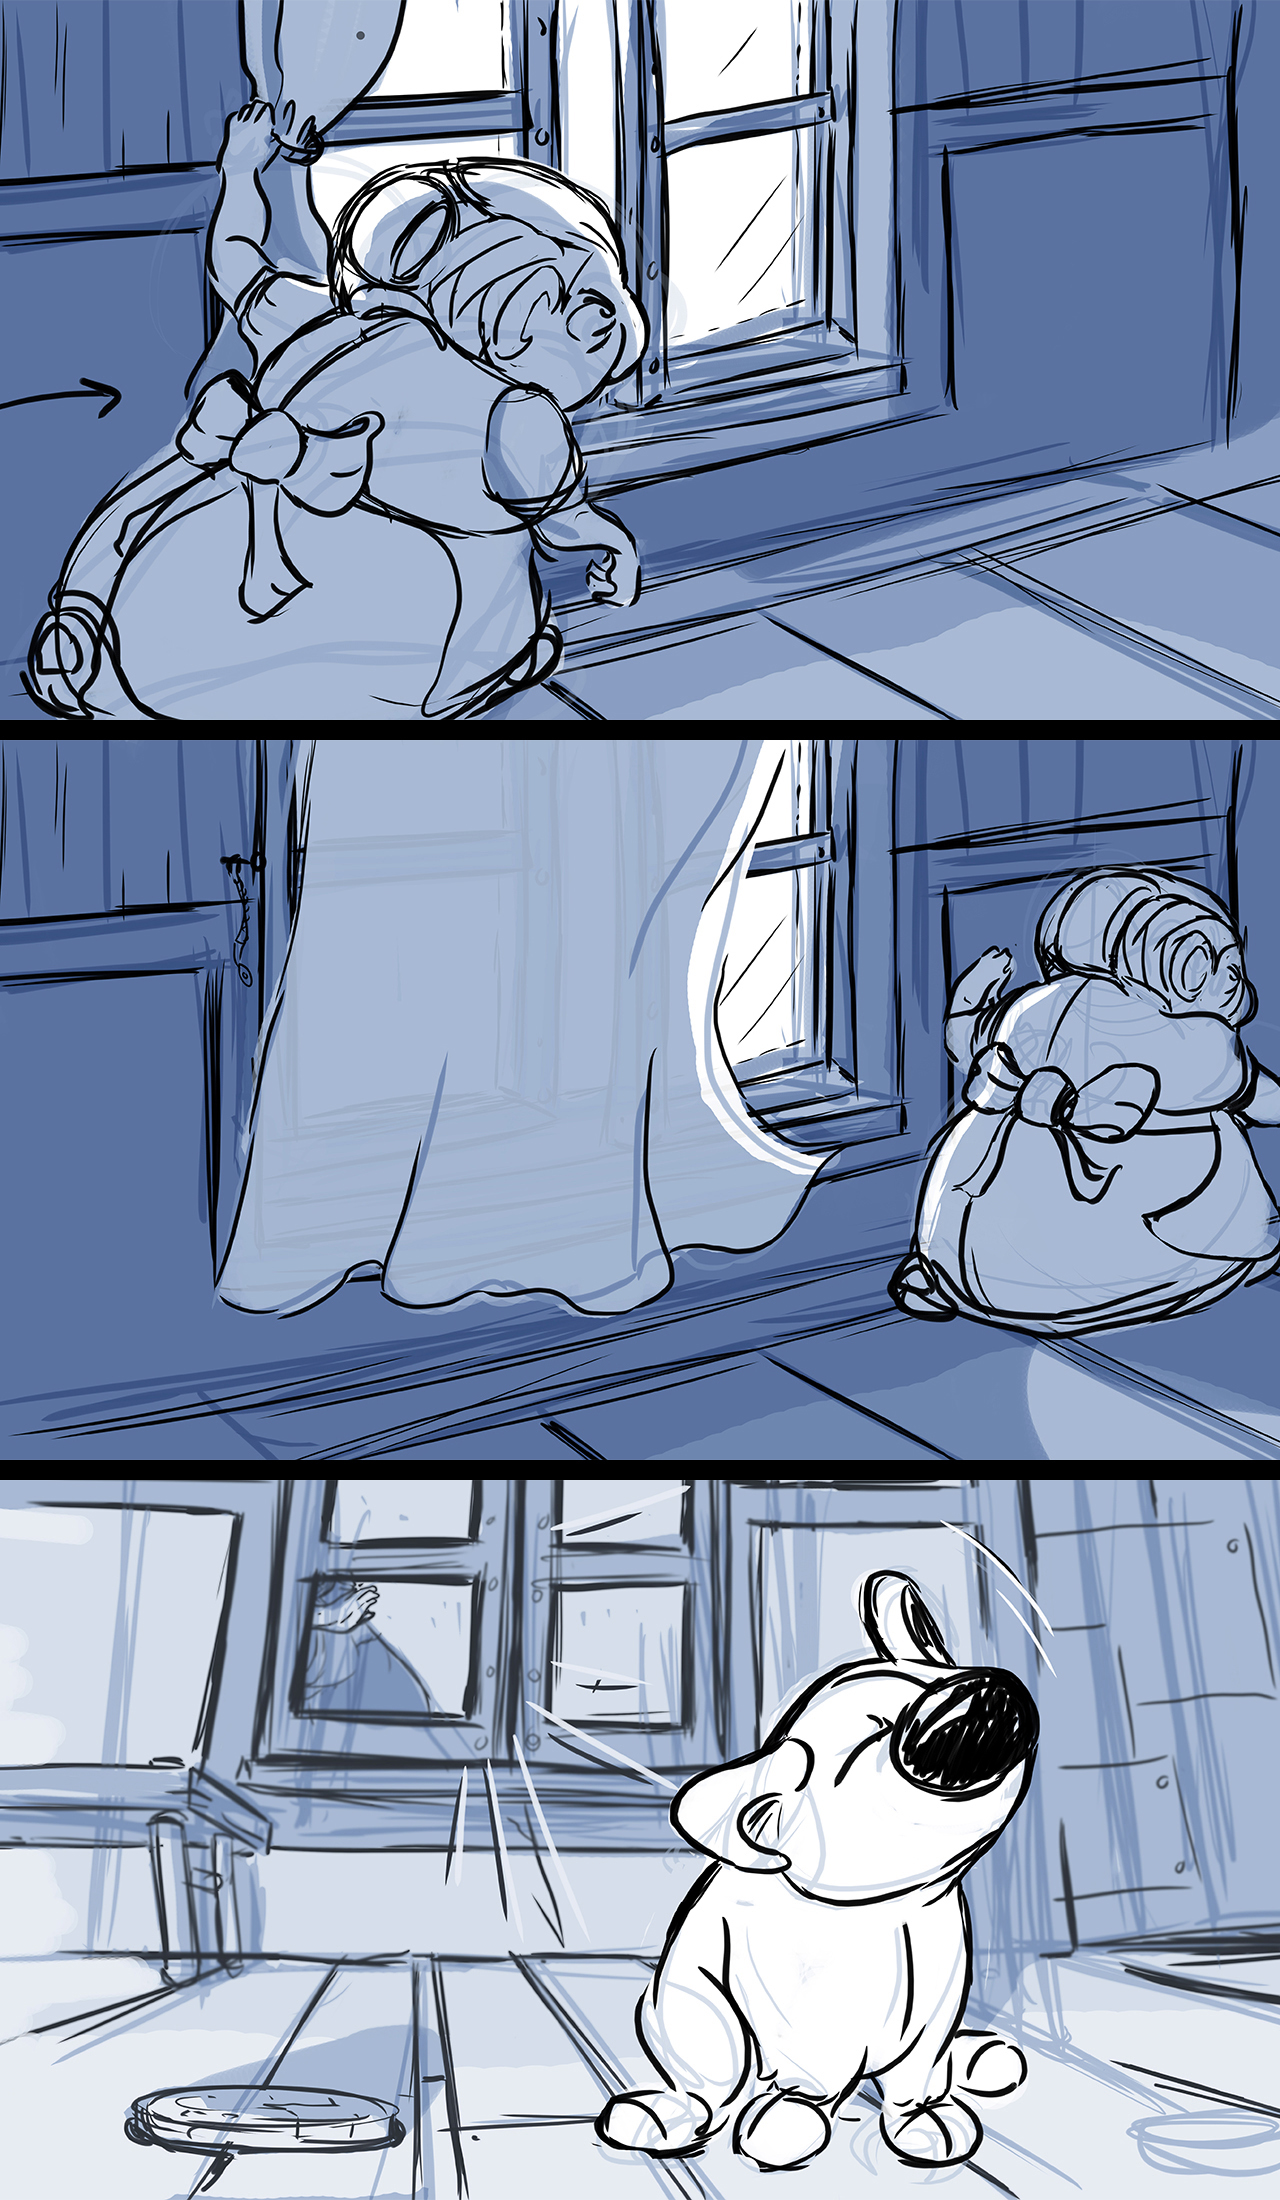 Storyboard sequence from an animated film. Sequence shows the woman closing a curtain.  It cuts to outside where the blind dog reacts to the noise inside.